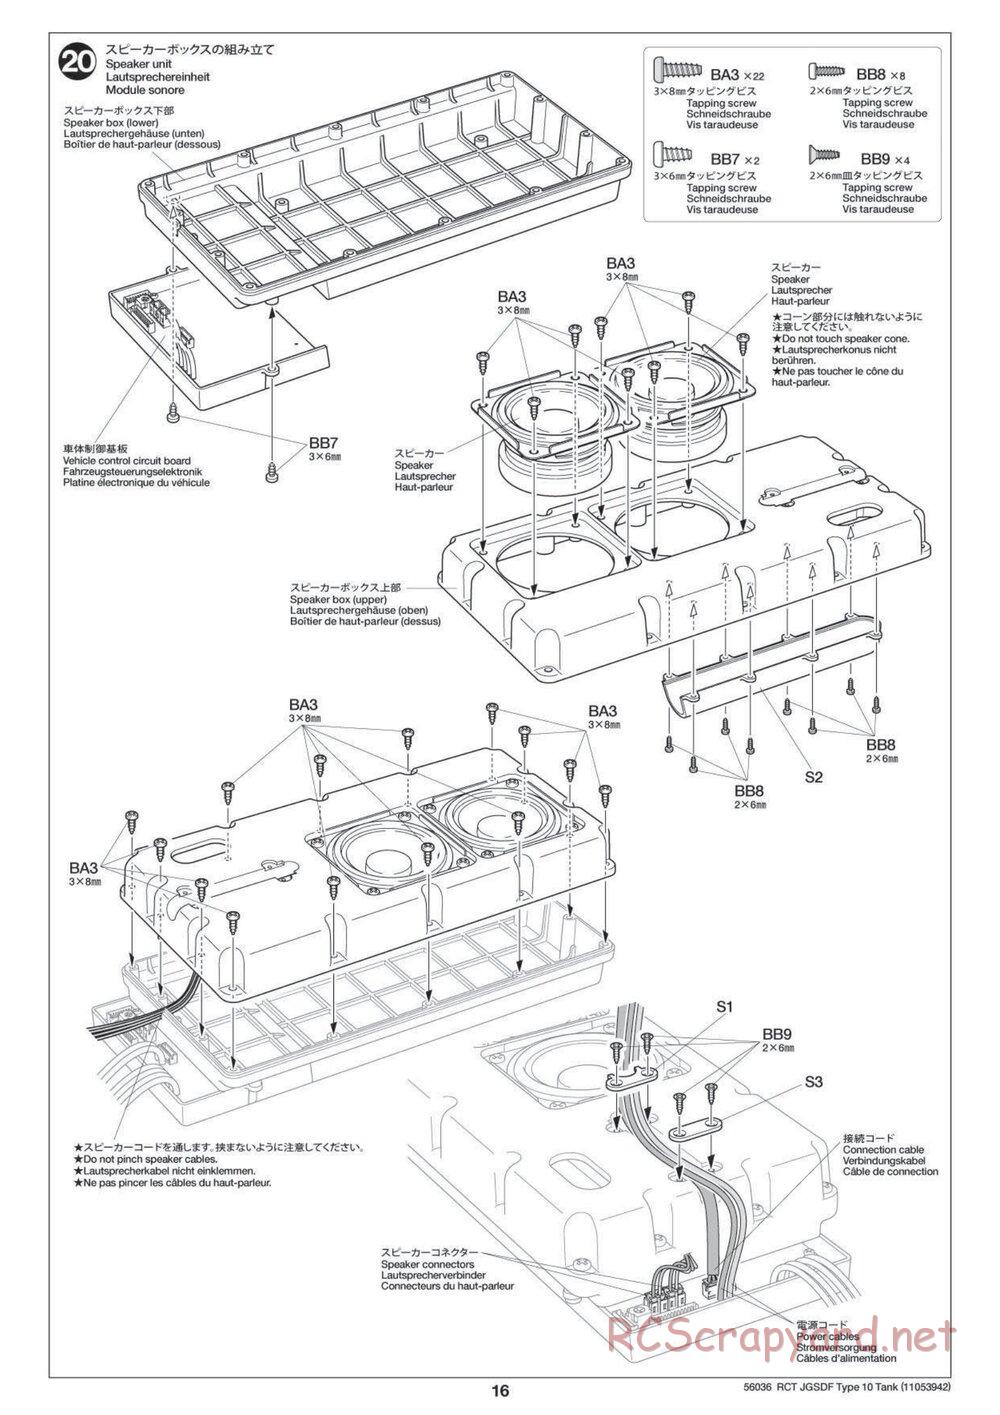 Tamiya - JGSDF Type 10 Tank - 1/16 Scale Chassis - Manual - Page 16